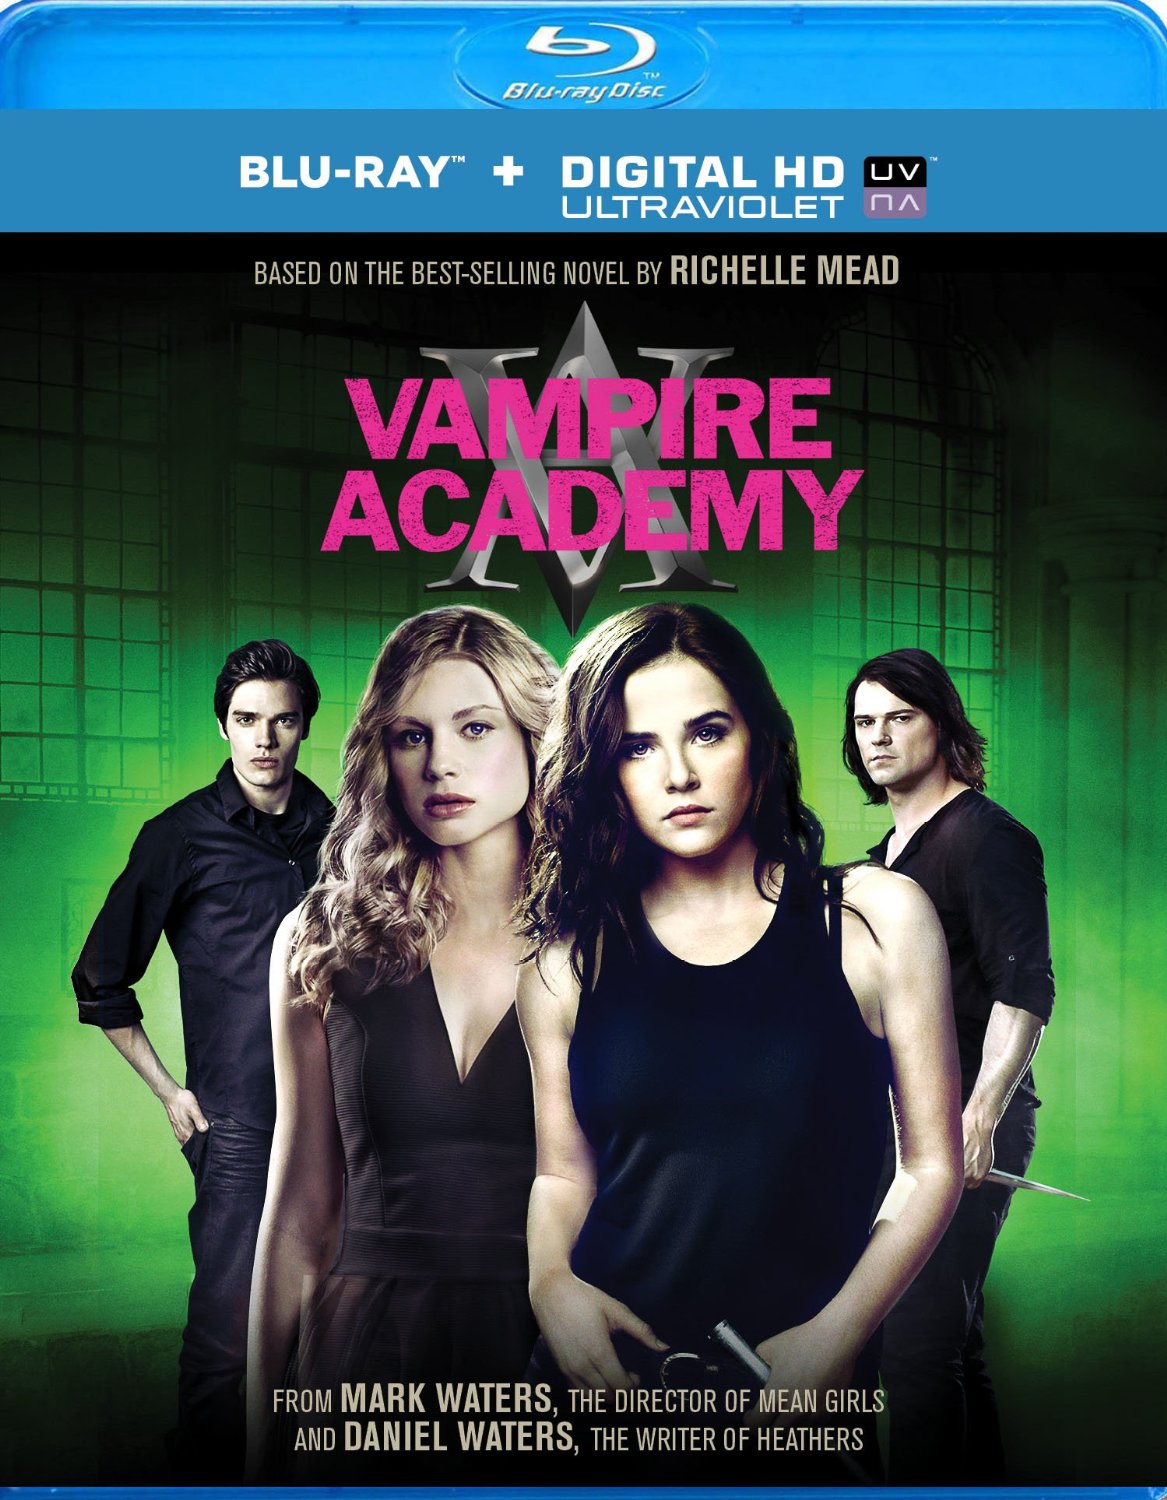 Vampire Academy was be released on Blu-ray and DVD on May 20, 2014